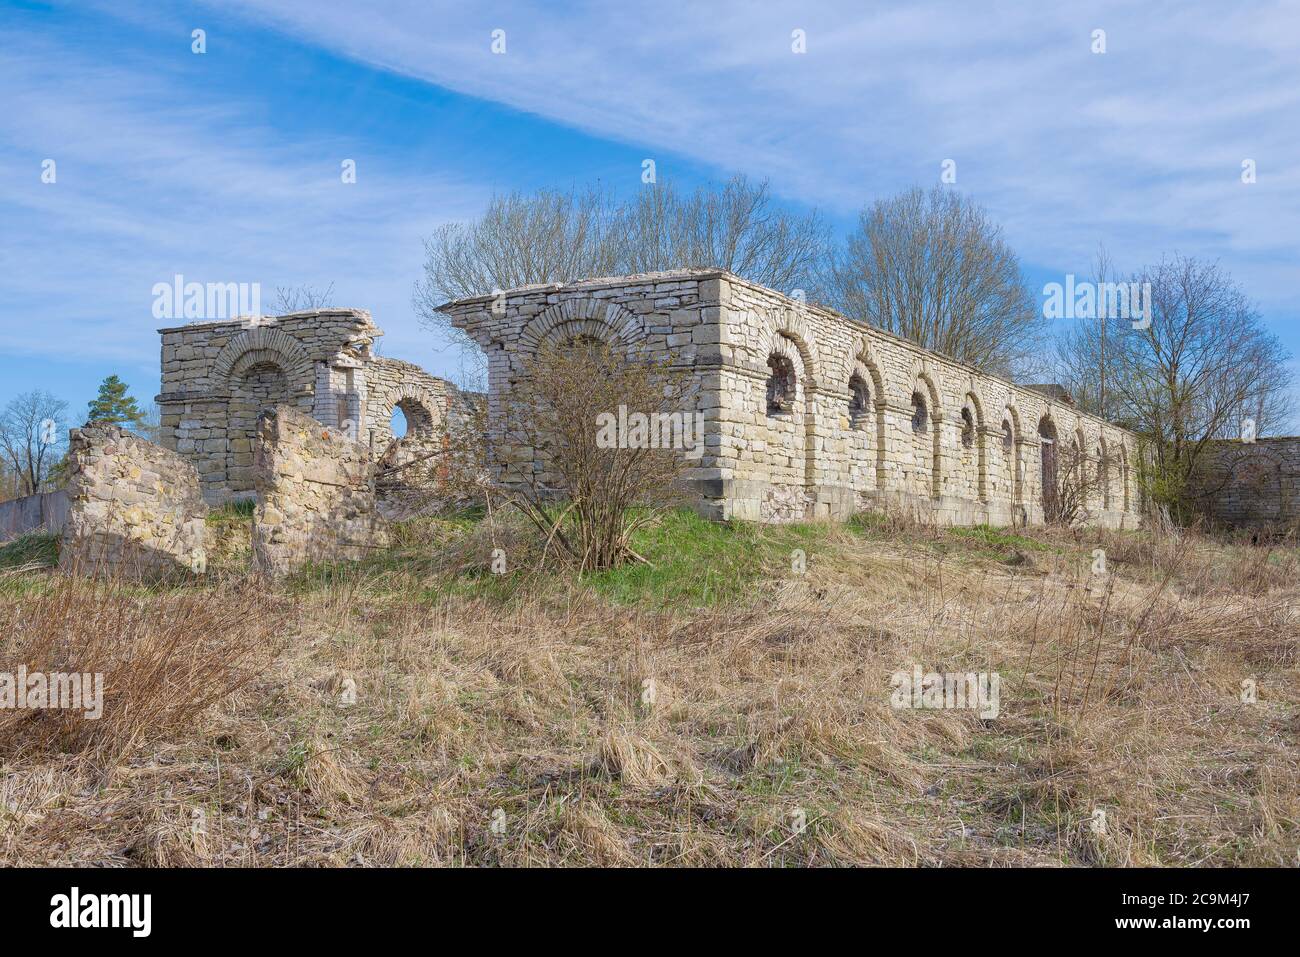 The ruins of an ancient stables building in the Dylitsy manor on a sunny April day. Elizavetino, Leningrad region. Russia Stock Photo